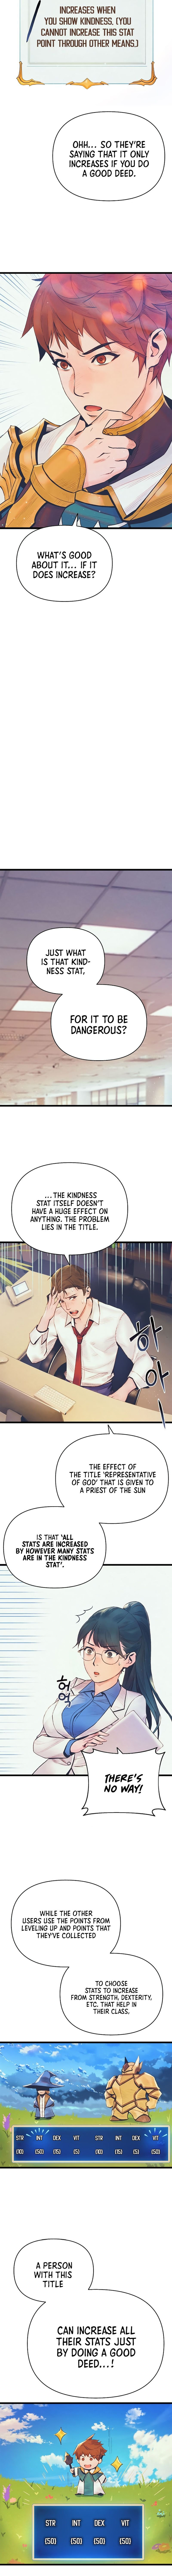 the-healing-priest-of-the-sun-chap-3-14